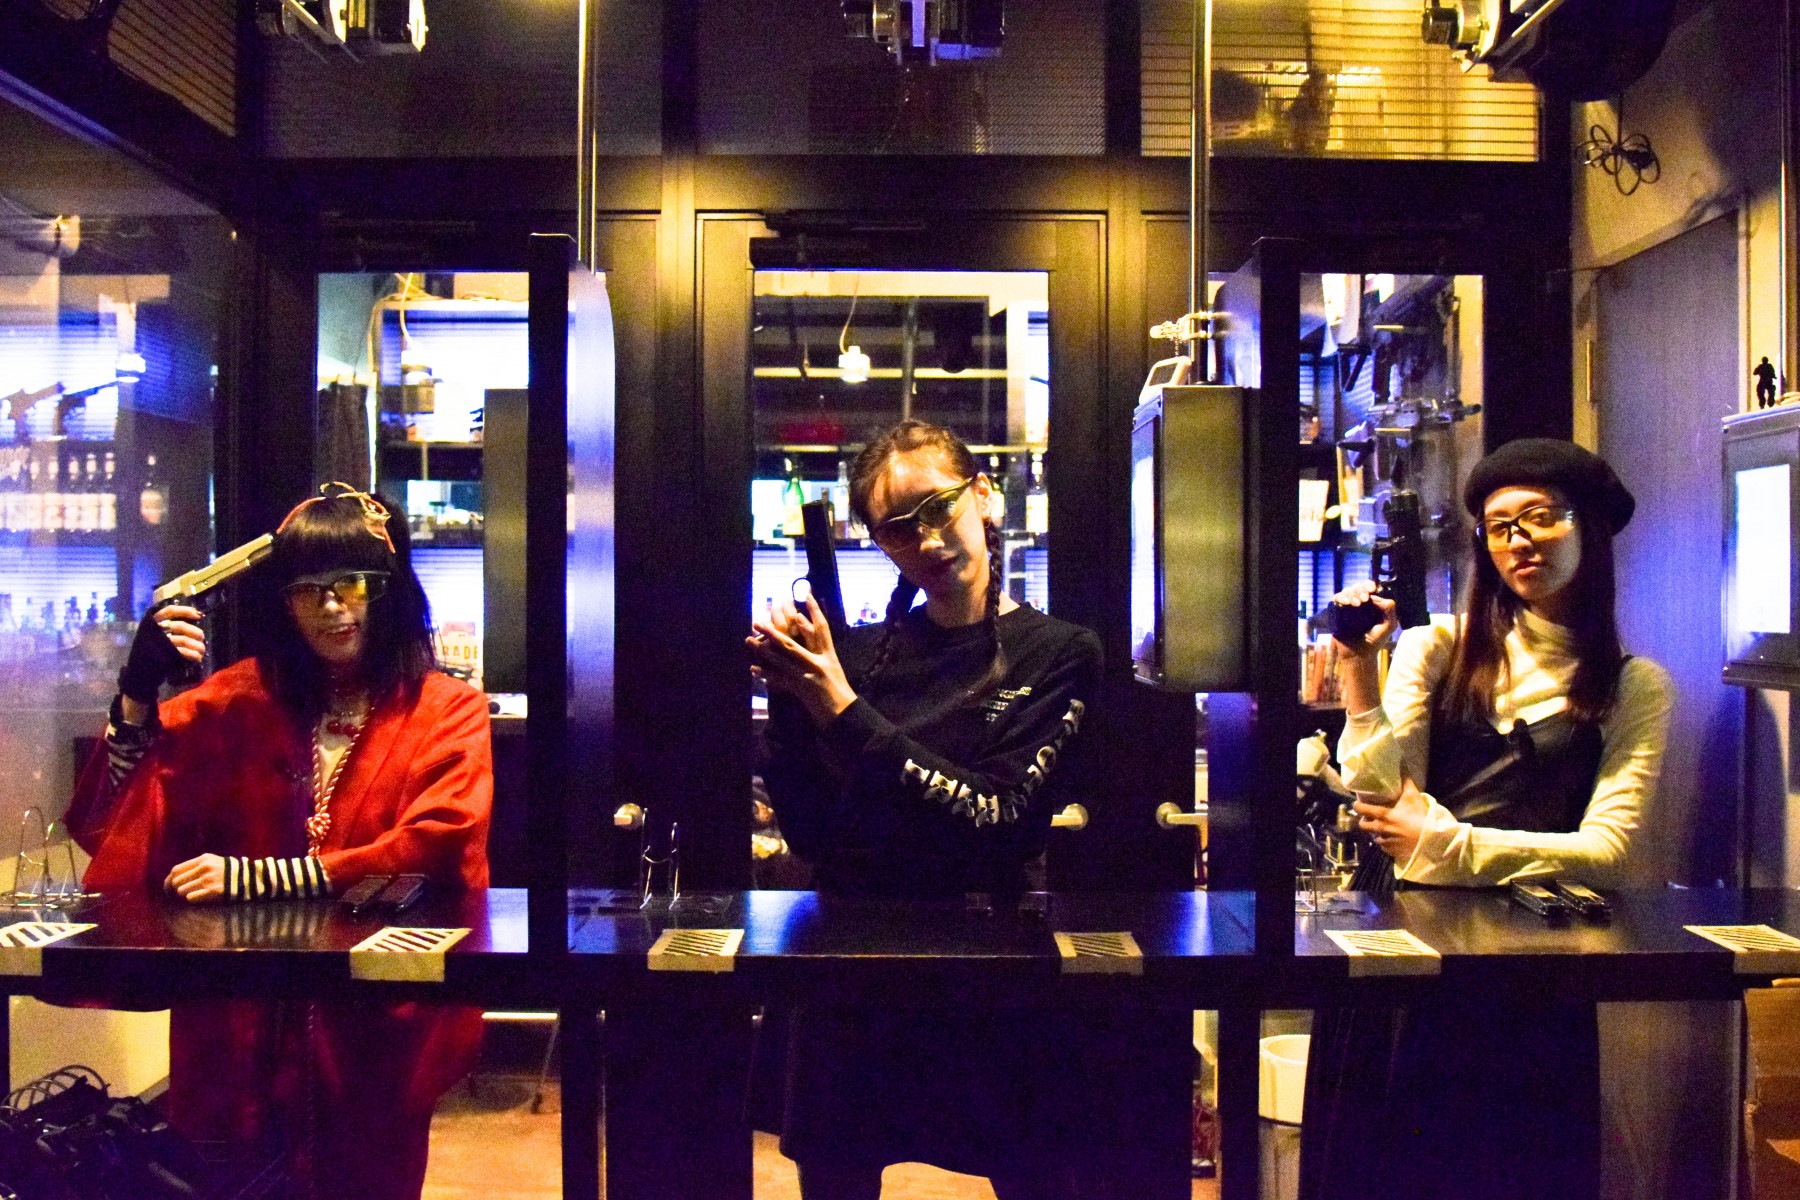 Want to Get a Taste of Being Part of Tokyo’s Mafia?! Shooting Bar EA Offers Both Drinks and Shooting Fun!